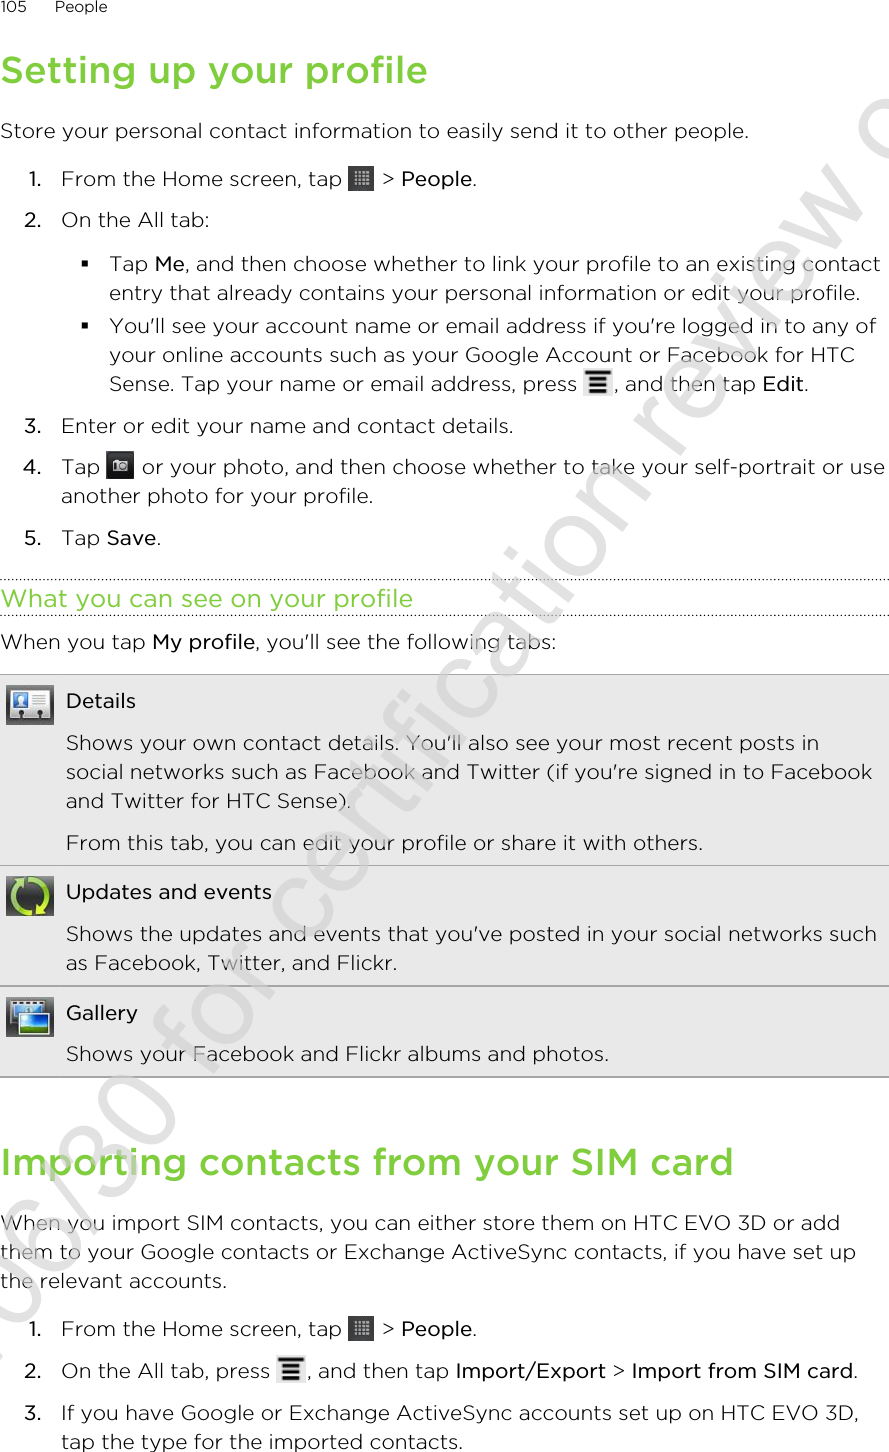 Setting up your profileStore your personal contact information to easily send it to other people.1. From the Home screen, tap   &gt; People.2. On the All tab:§Tap Me, and then choose whether to link your profile to an existing contactentry that already contains your personal information or edit your profile.§You&apos;ll see your account name or email address if you&apos;re logged in to any ofyour online accounts such as your Google Account or Facebook for HTCSense. Tap your name or email address, press  , and then tap Edit.3. Enter or edit your name and contact details.4. Tap   or your photo, and then choose whether to take your self-portrait or useanother photo for your profile.5. Tap Save.What you can see on your profileWhen you tap My profile, you&apos;ll see the following tabs:DetailsShows your own contact details. You&apos;ll also see your most recent posts insocial networks such as Facebook and Twitter (if you&apos;re signed in to Facebookand Twitter for HTC Sense).From this tab, you can edit your profile or share it with others.Updates and eventsShows the updates and events that you&apos;ve posted in your social networks suchas Facebook, Twitter, and Flickr.GalleryShows your Facebook and Flickr albums and photos.Importing contacts from your SIM cardWhen you import SIM contacts, you can either store them on HTC EVO 3D or addthem to your Google contacts or Exchange ActiveSync contacts, if you have set upthe relevant accounts.1. From the Home screen, tap   &gt; People.2. On the All tab, press  , and then tap Import/Export &gt; Import from SIM card.3. If you have Google or Exchange ActiveSync accounts set up on HTC EVO 3D,tap the type for the imported contacts.105 People2011/06/30 for certification review only